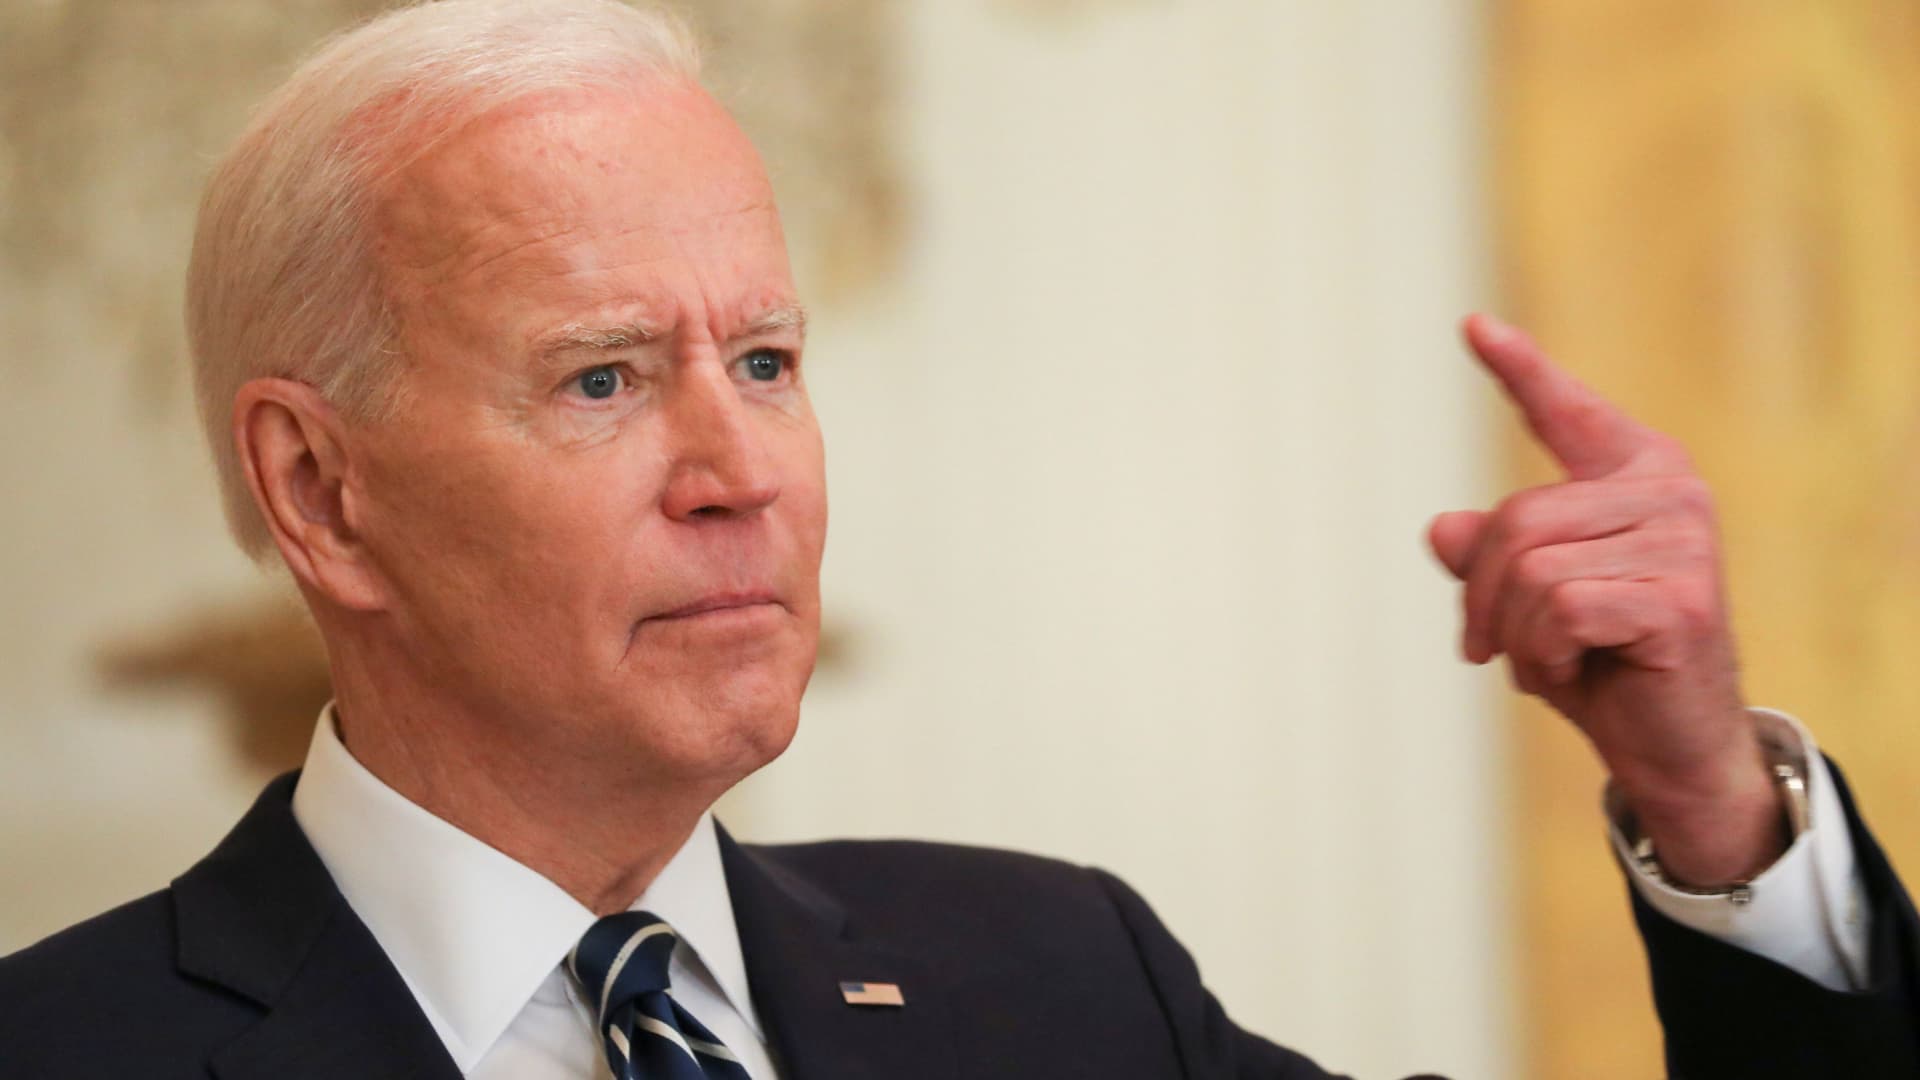 President Joe Biden gestures as he answers a question during his first formal news conference as president in the East Room of the White House in Washington, March 25, 2021.